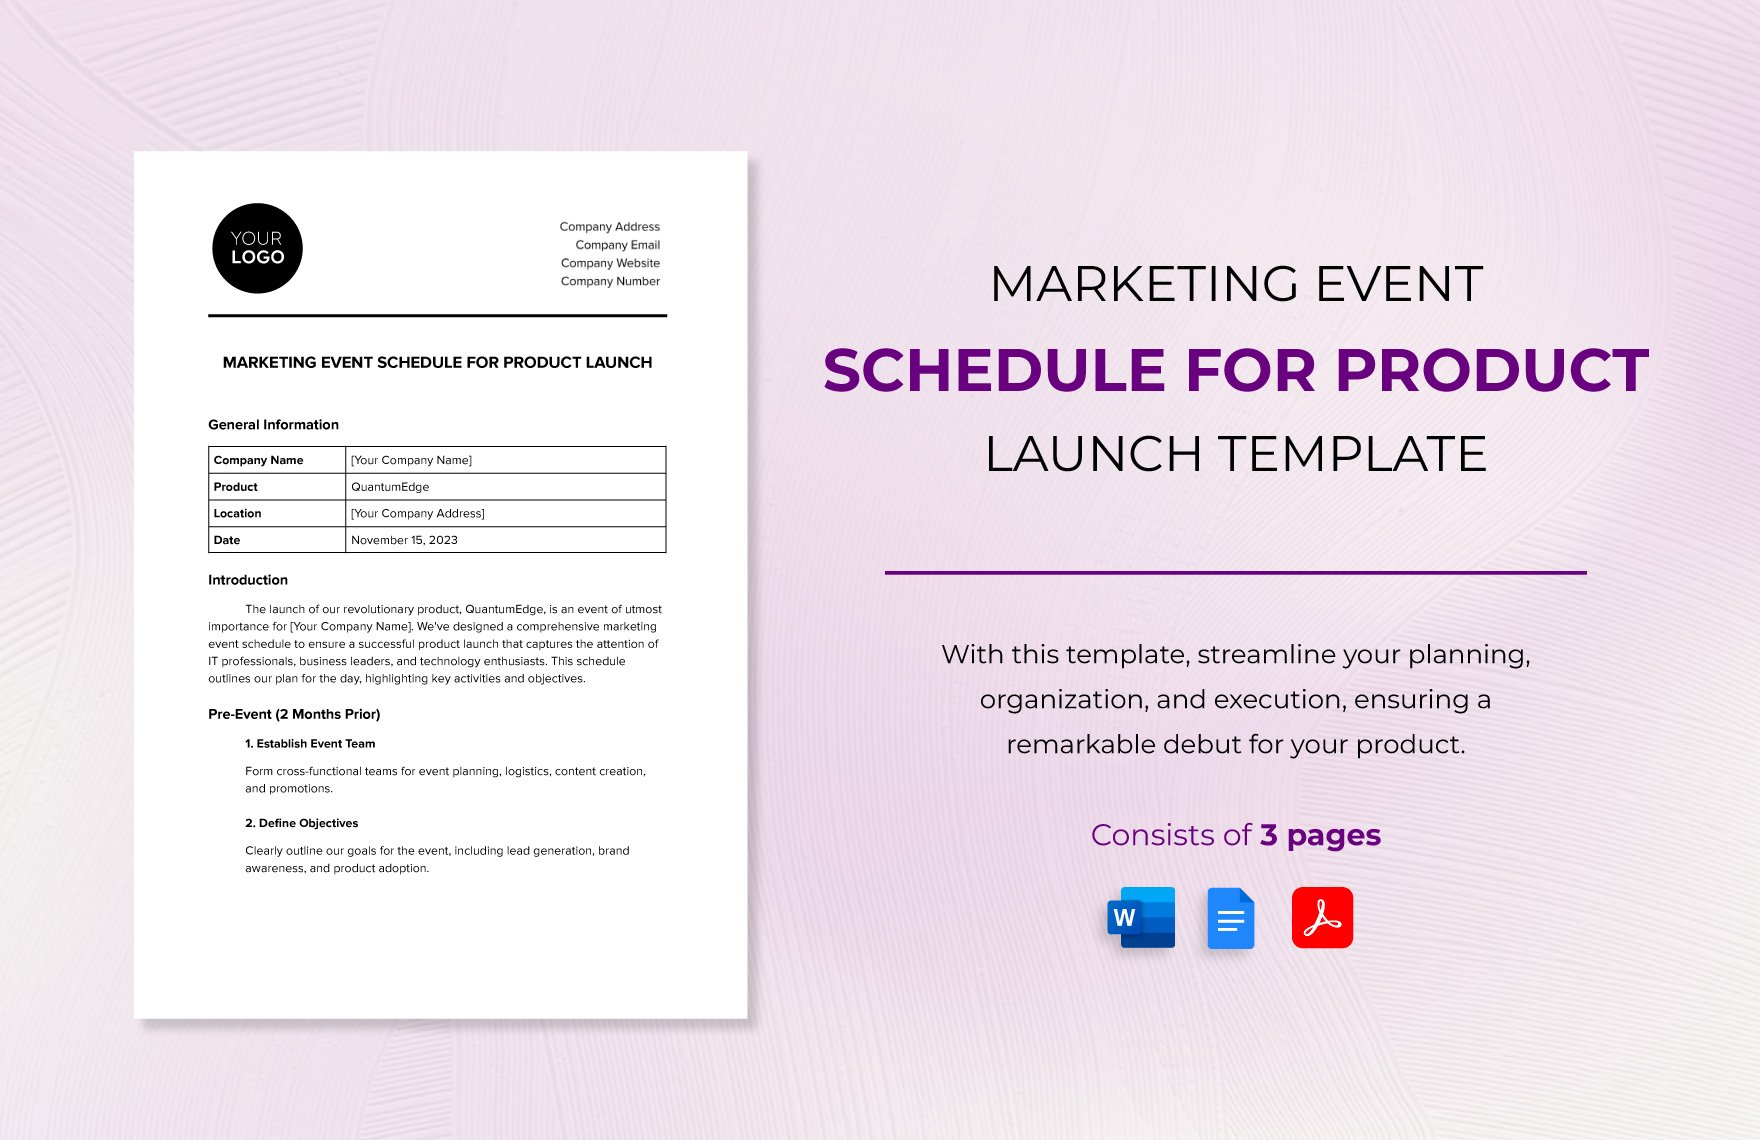 Marketing Event Schedule for Product Launch Template